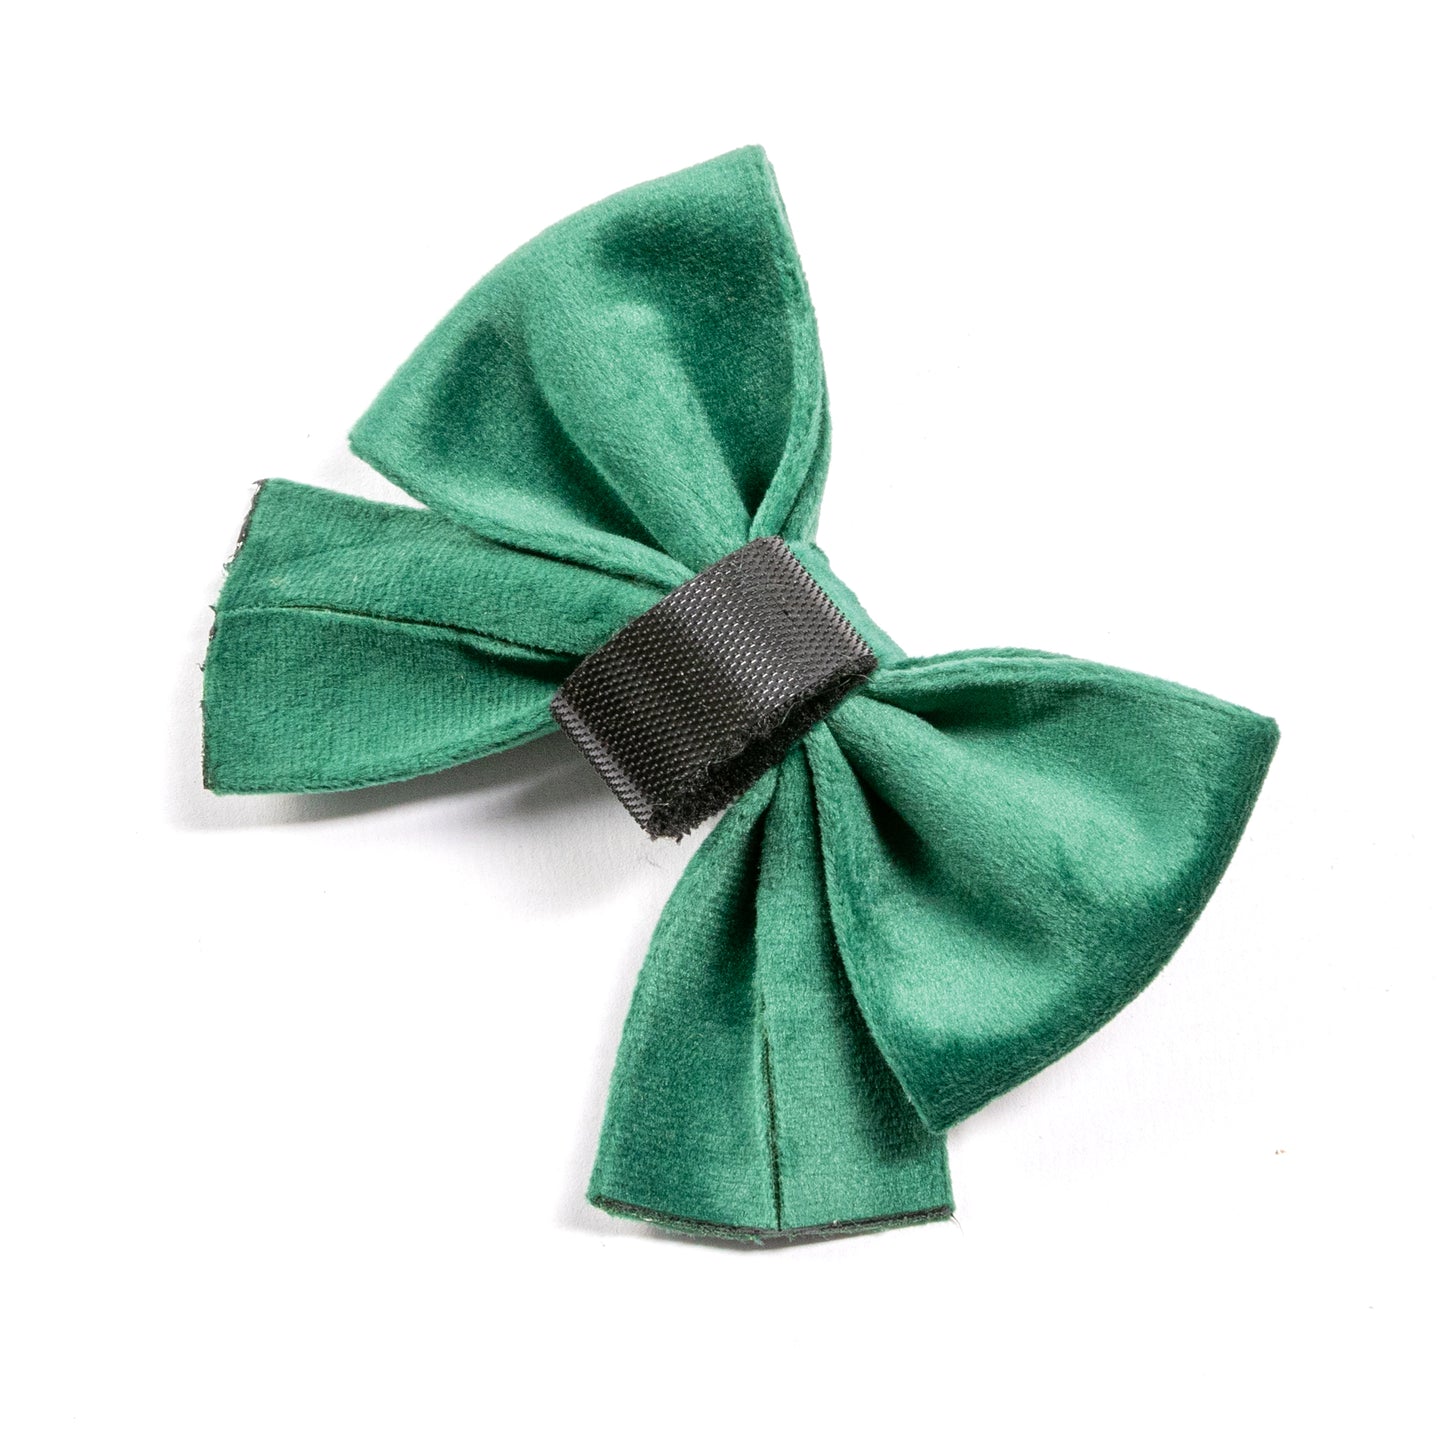 Emerald Green Collection- Dog Harness, Collar, Bow Tie, Lead and Poop Bag Holder